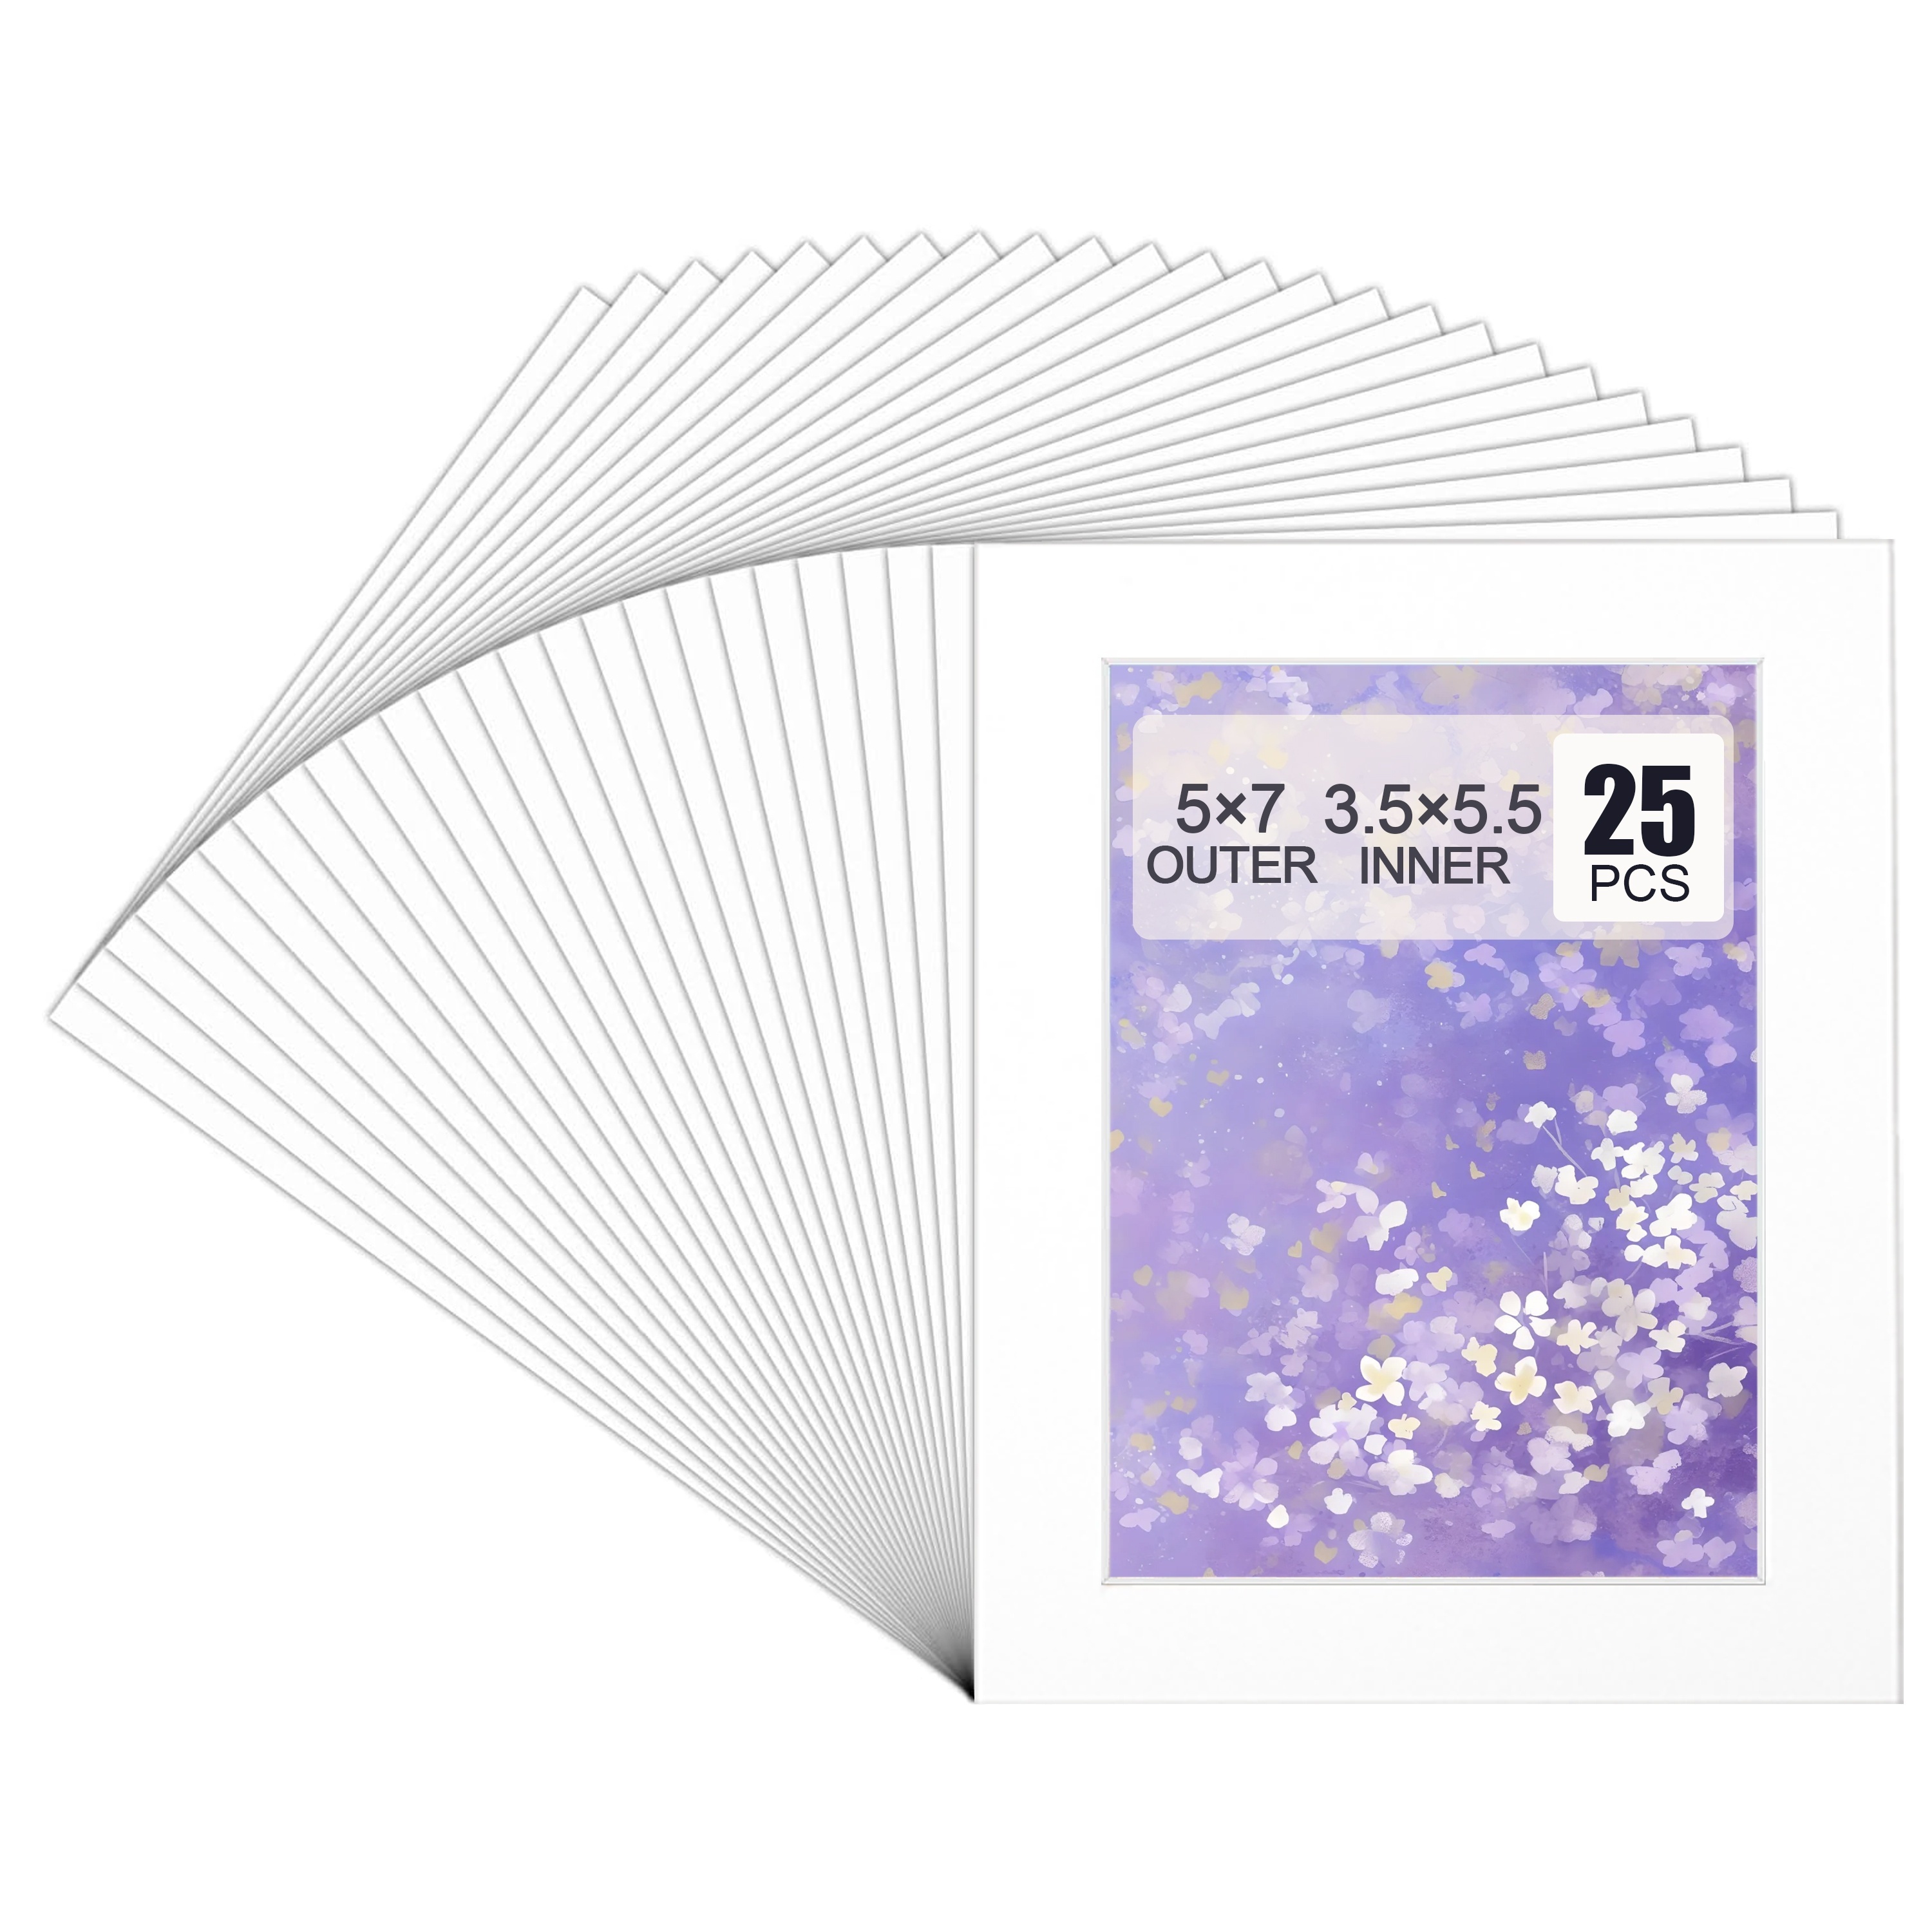 

25pcs White Picture Mats 5x7" - Acid-free, Beveled Edge For Frames & Wall Decor, Perfect For Photos & Artwork